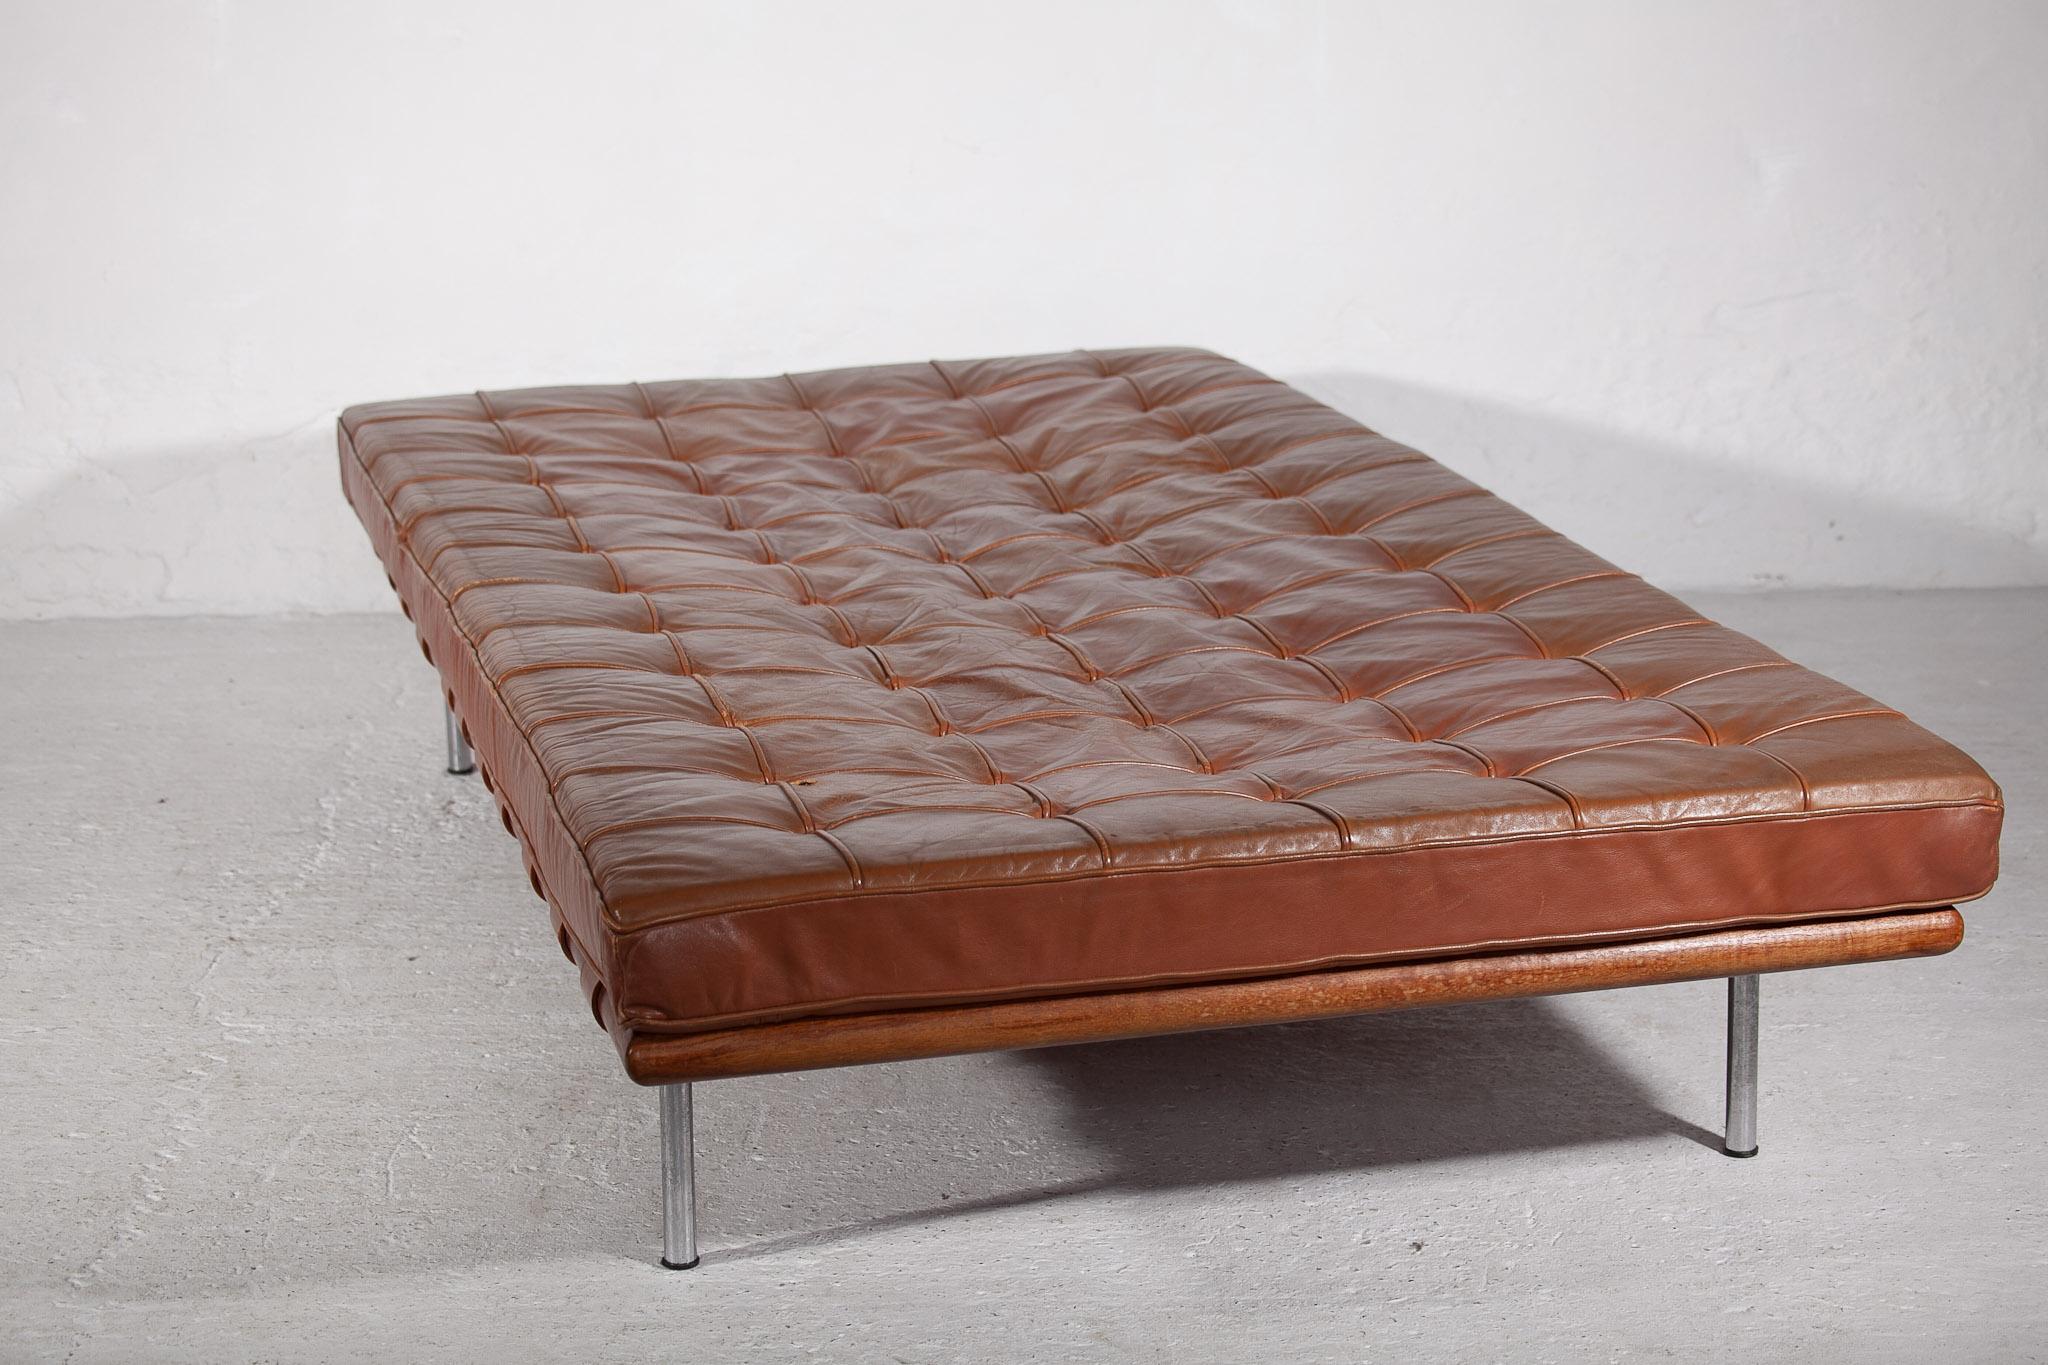 German Brown Leather Barcelona Daybed by Ludwig Mies van der Rohe, for Knoll For Sale